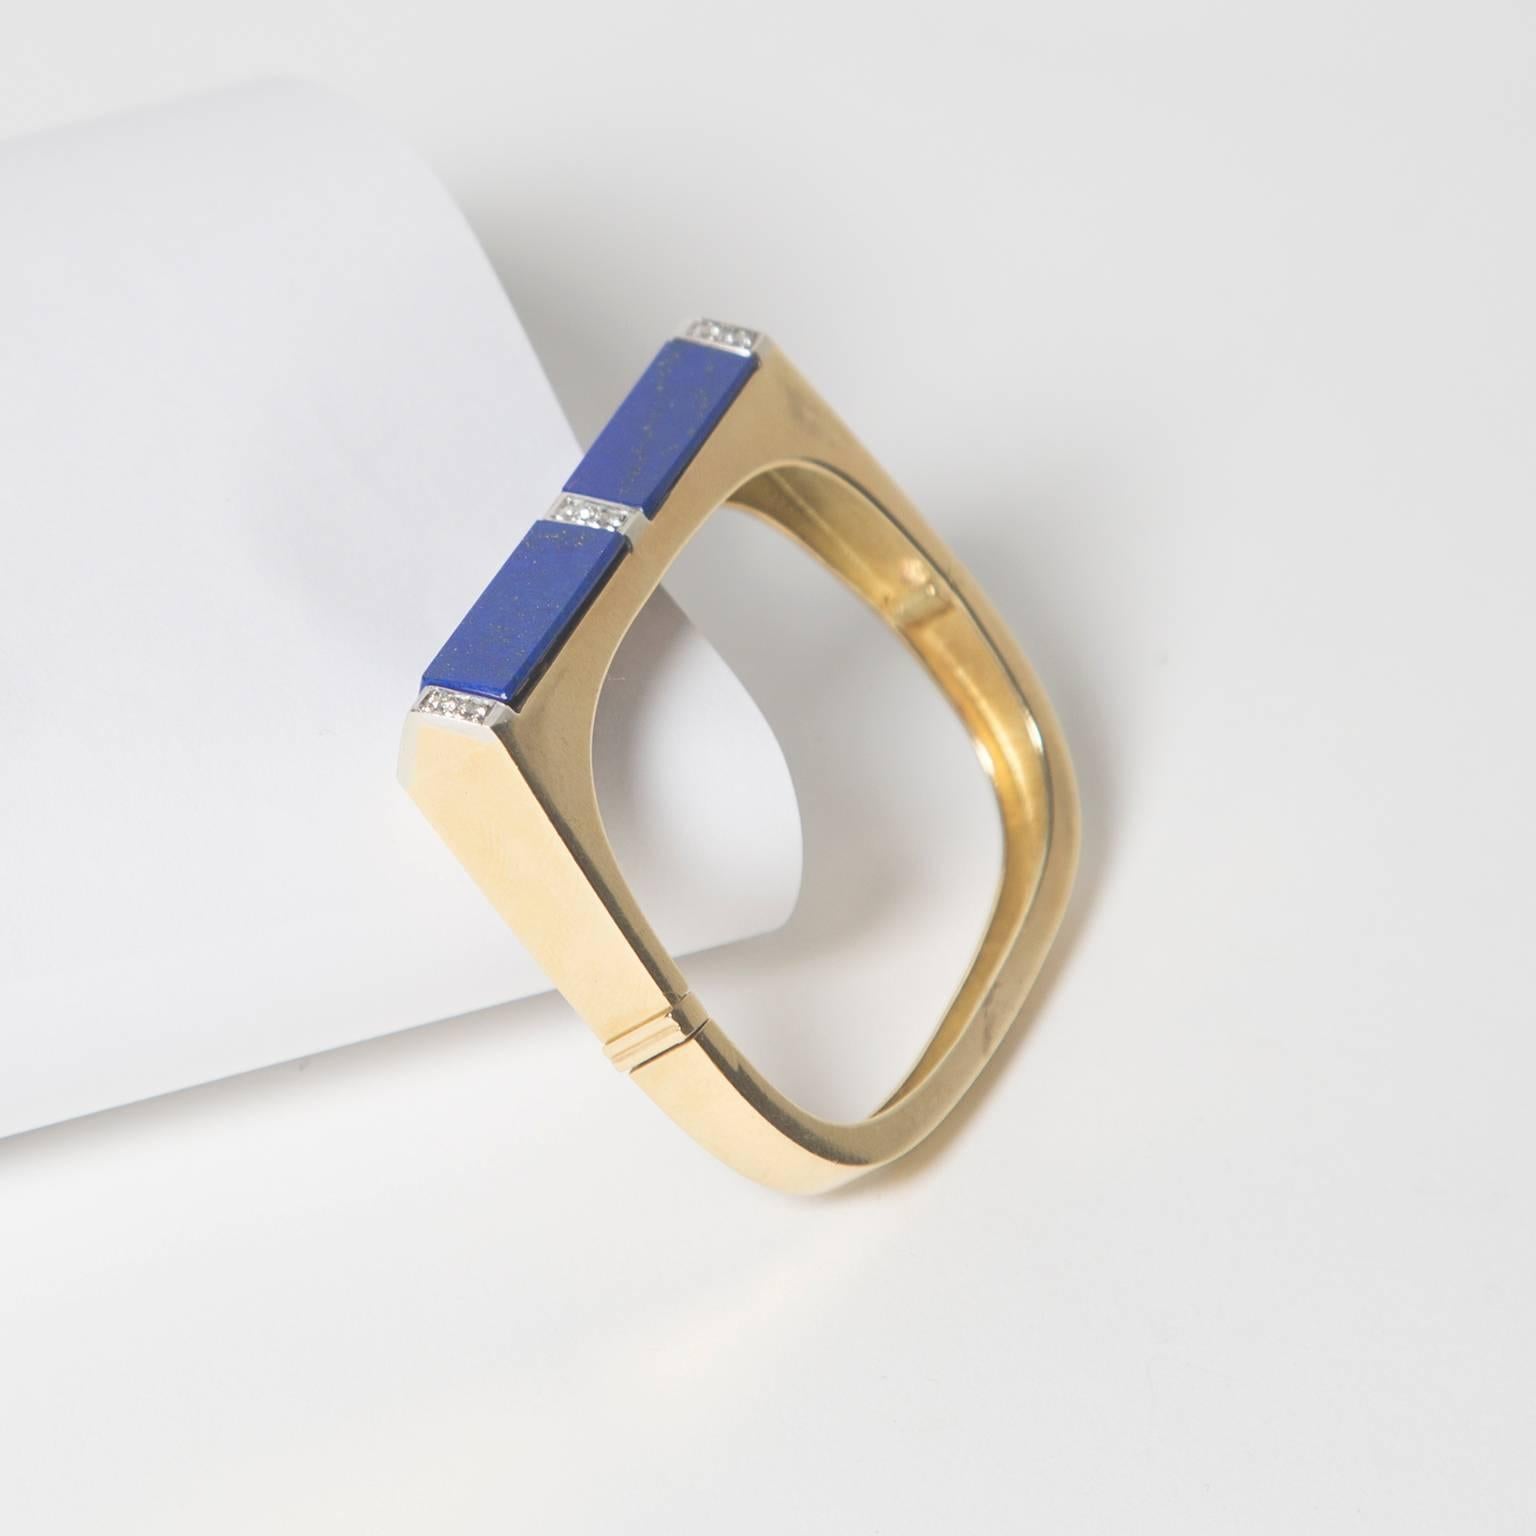 Solid 18K gold cuff inlaid with rich blue lapis and framed with diamonds. Fits a small wrist. 